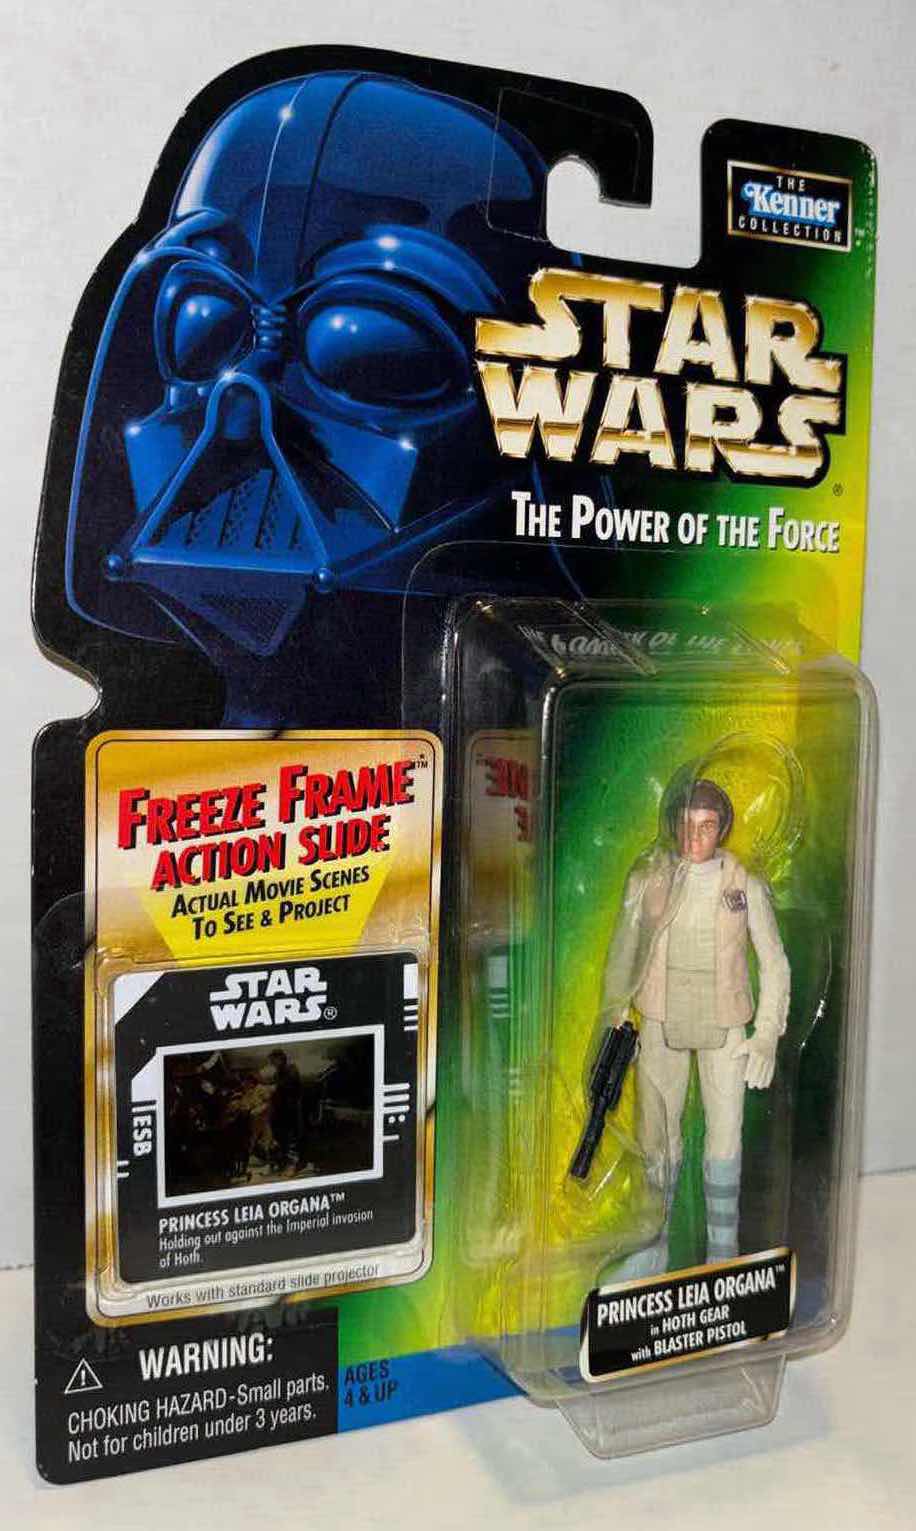 Photo 1 of NEW KENNER STAR WARS THE POWER OF THE FORCE ACTION FIGURE, PRINCESS LEIA ORGANA IN HOTH GEAR W BLASTER PISTOL & FREEZE FRAME ACTION SLIDE (1)